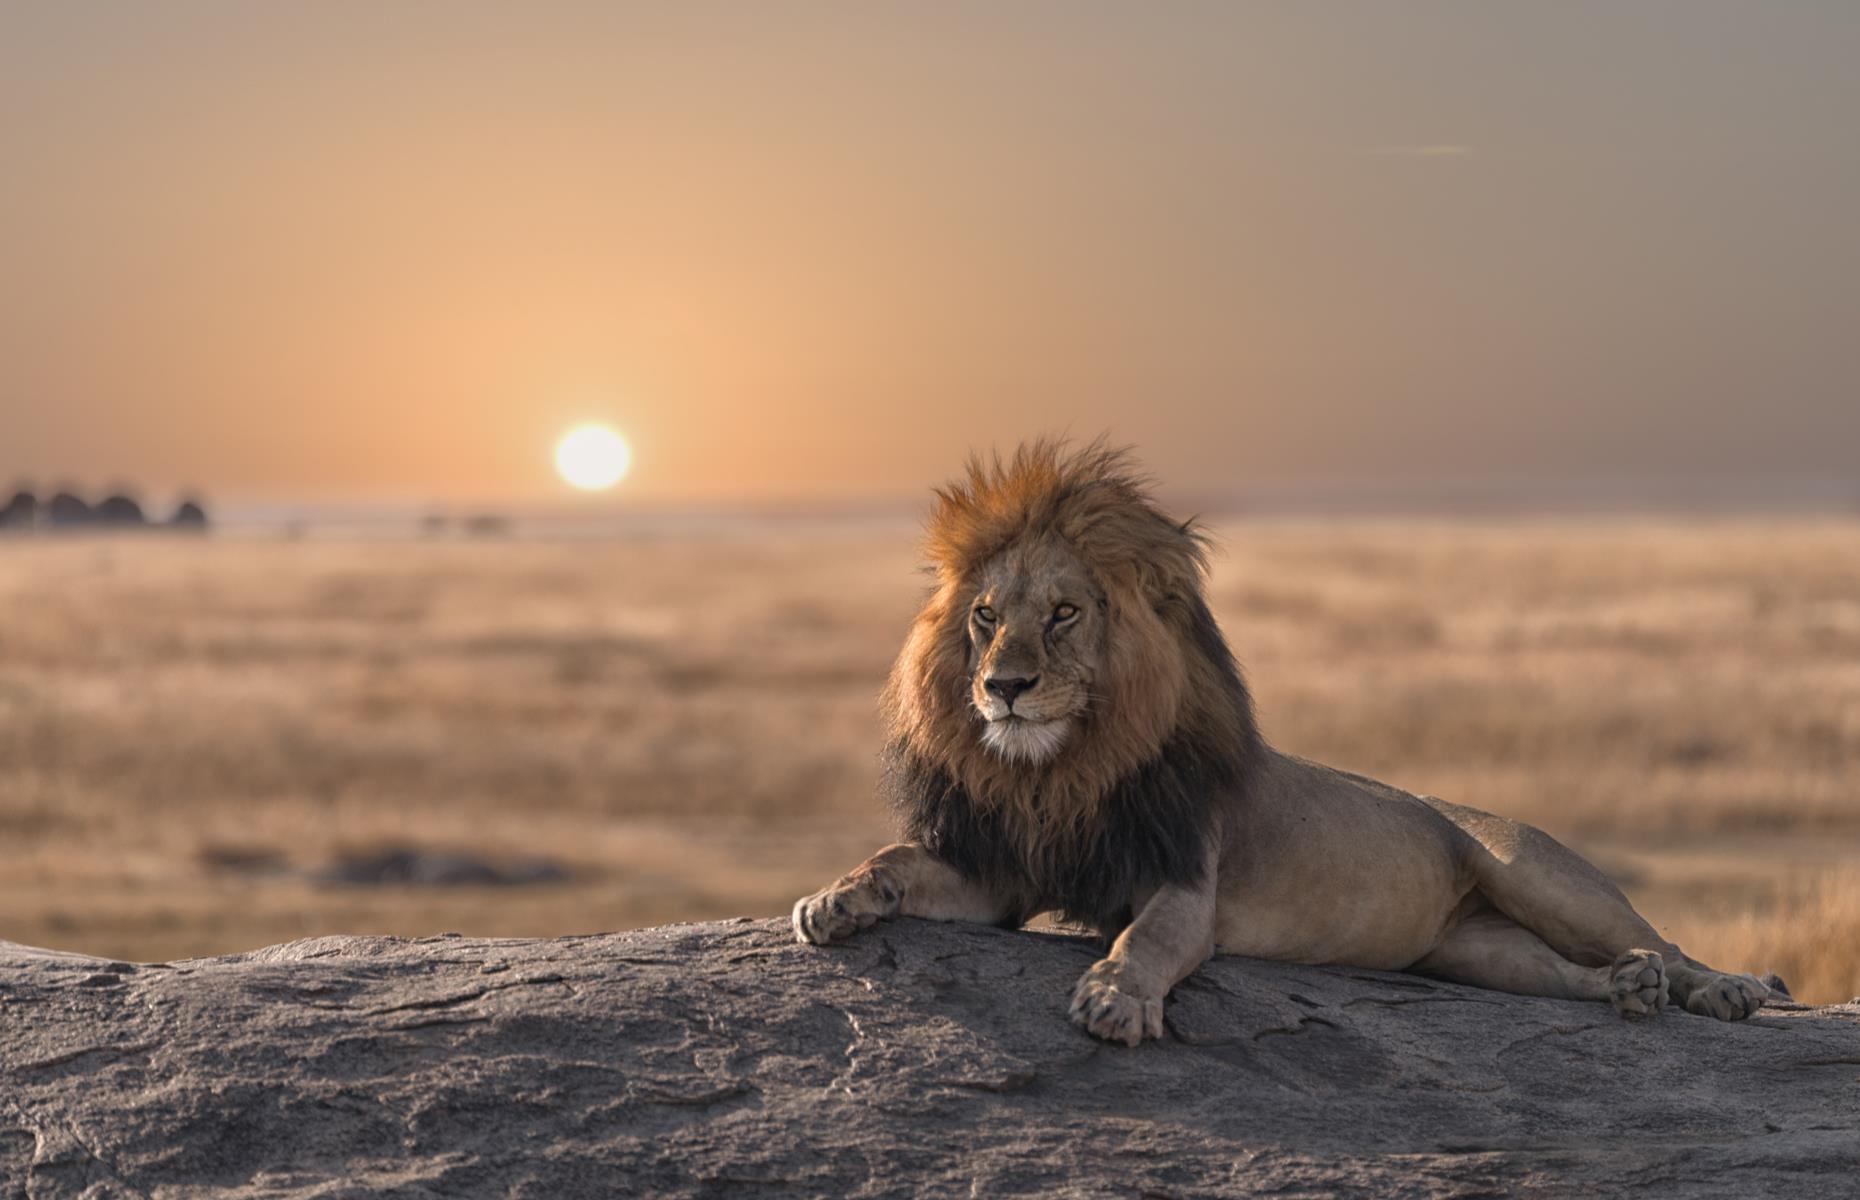 <p>From walking with lions in Kenya’s Maasai Mara to searching for polar bears in the fjords of East Greenland and swimming with manatees in Florida, observing animals in their natural habitat can be one of the most exhilarating experiences around.</p>  <p><strong>Click or scroll through the gallery to discover the world's most incredible wildlife trips for your bucket list...</strong></p>